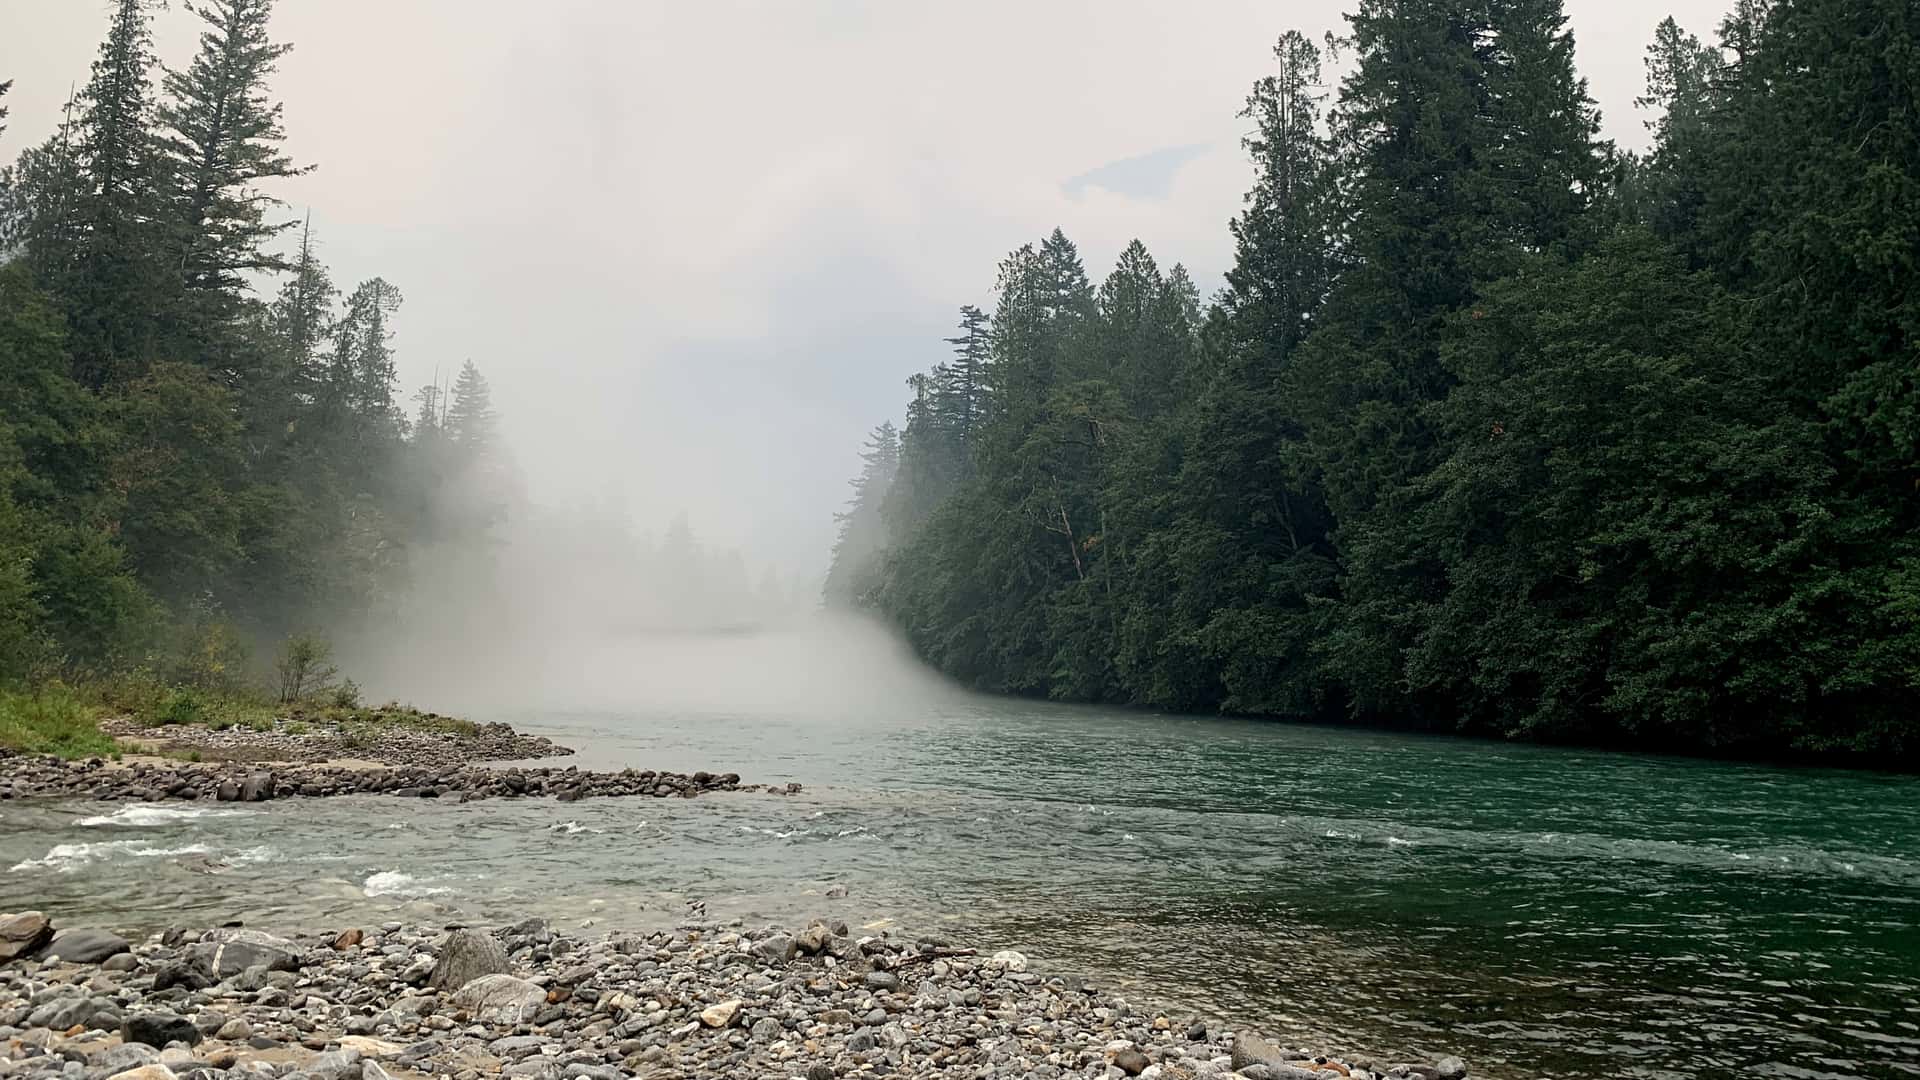 morning mist over the Skagit River compressed by a wave of hot air from a wildfire